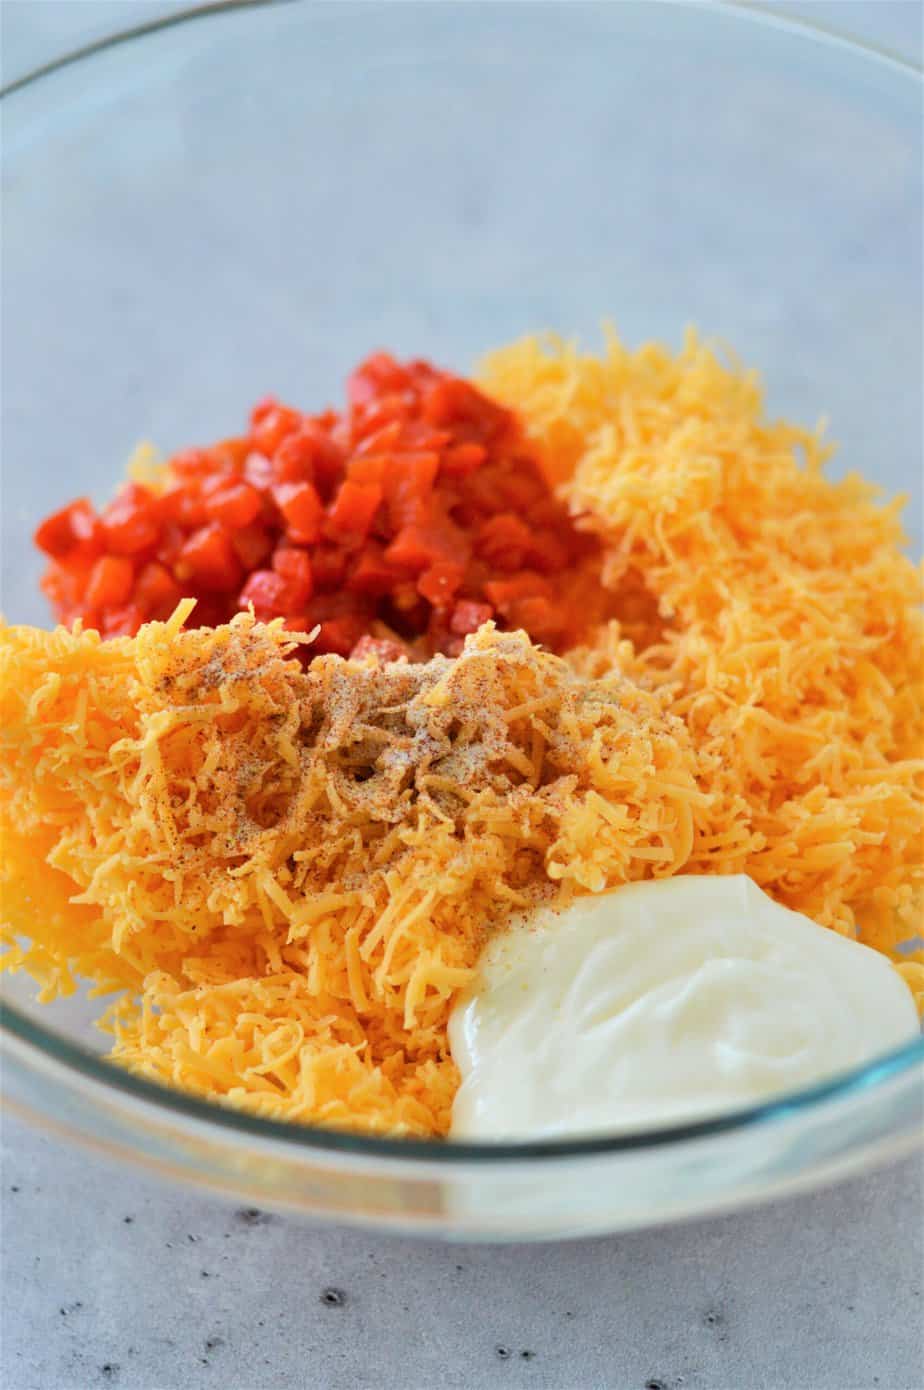 shredded cheese, mayonnaise, diced pimentos and spices in glass bowl